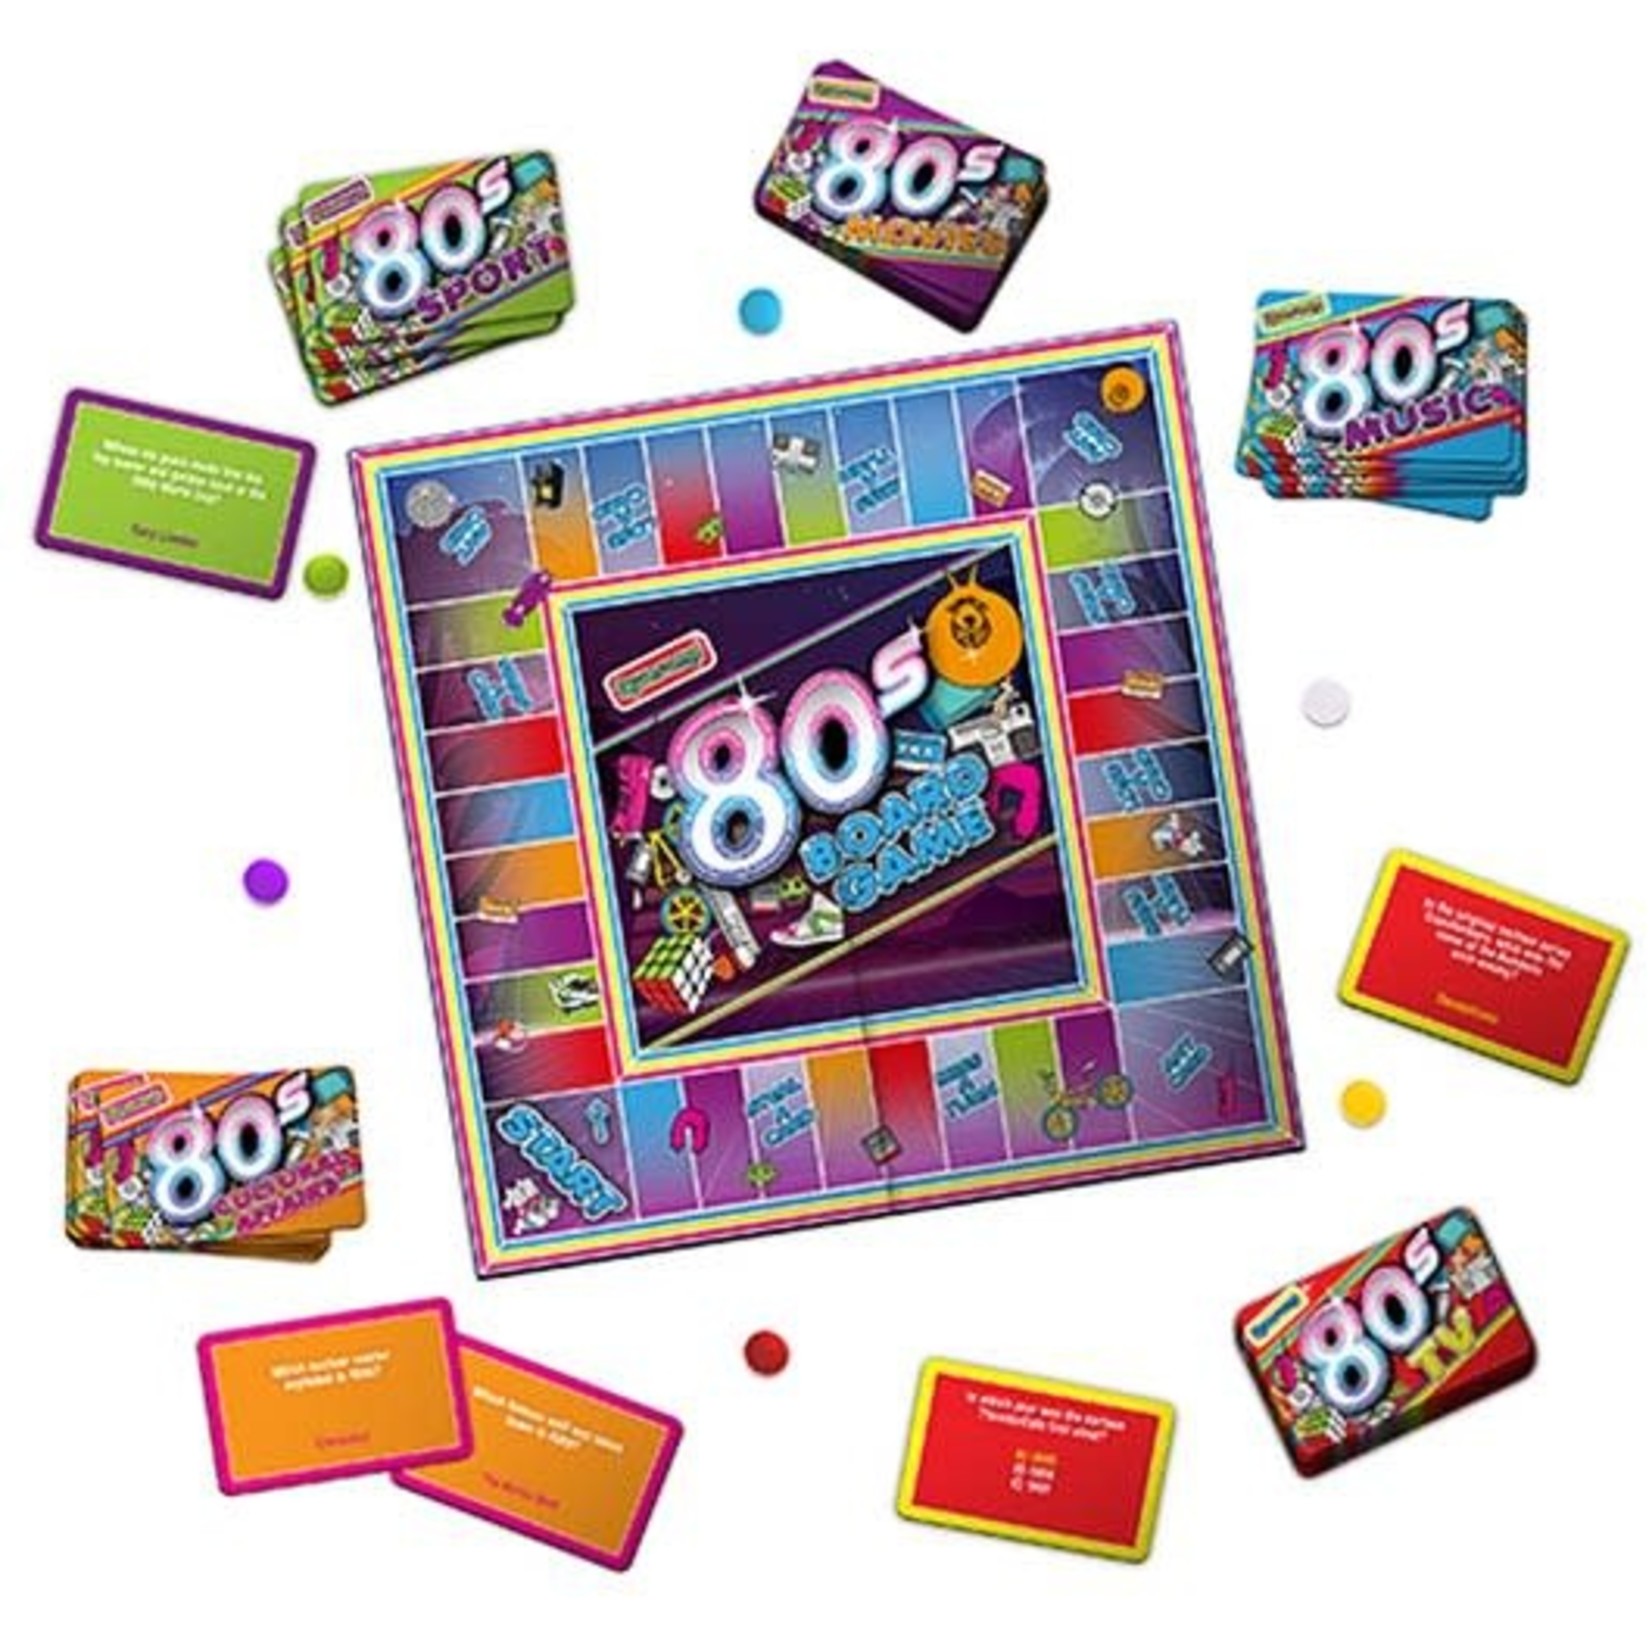 Game - 80’s Board Game